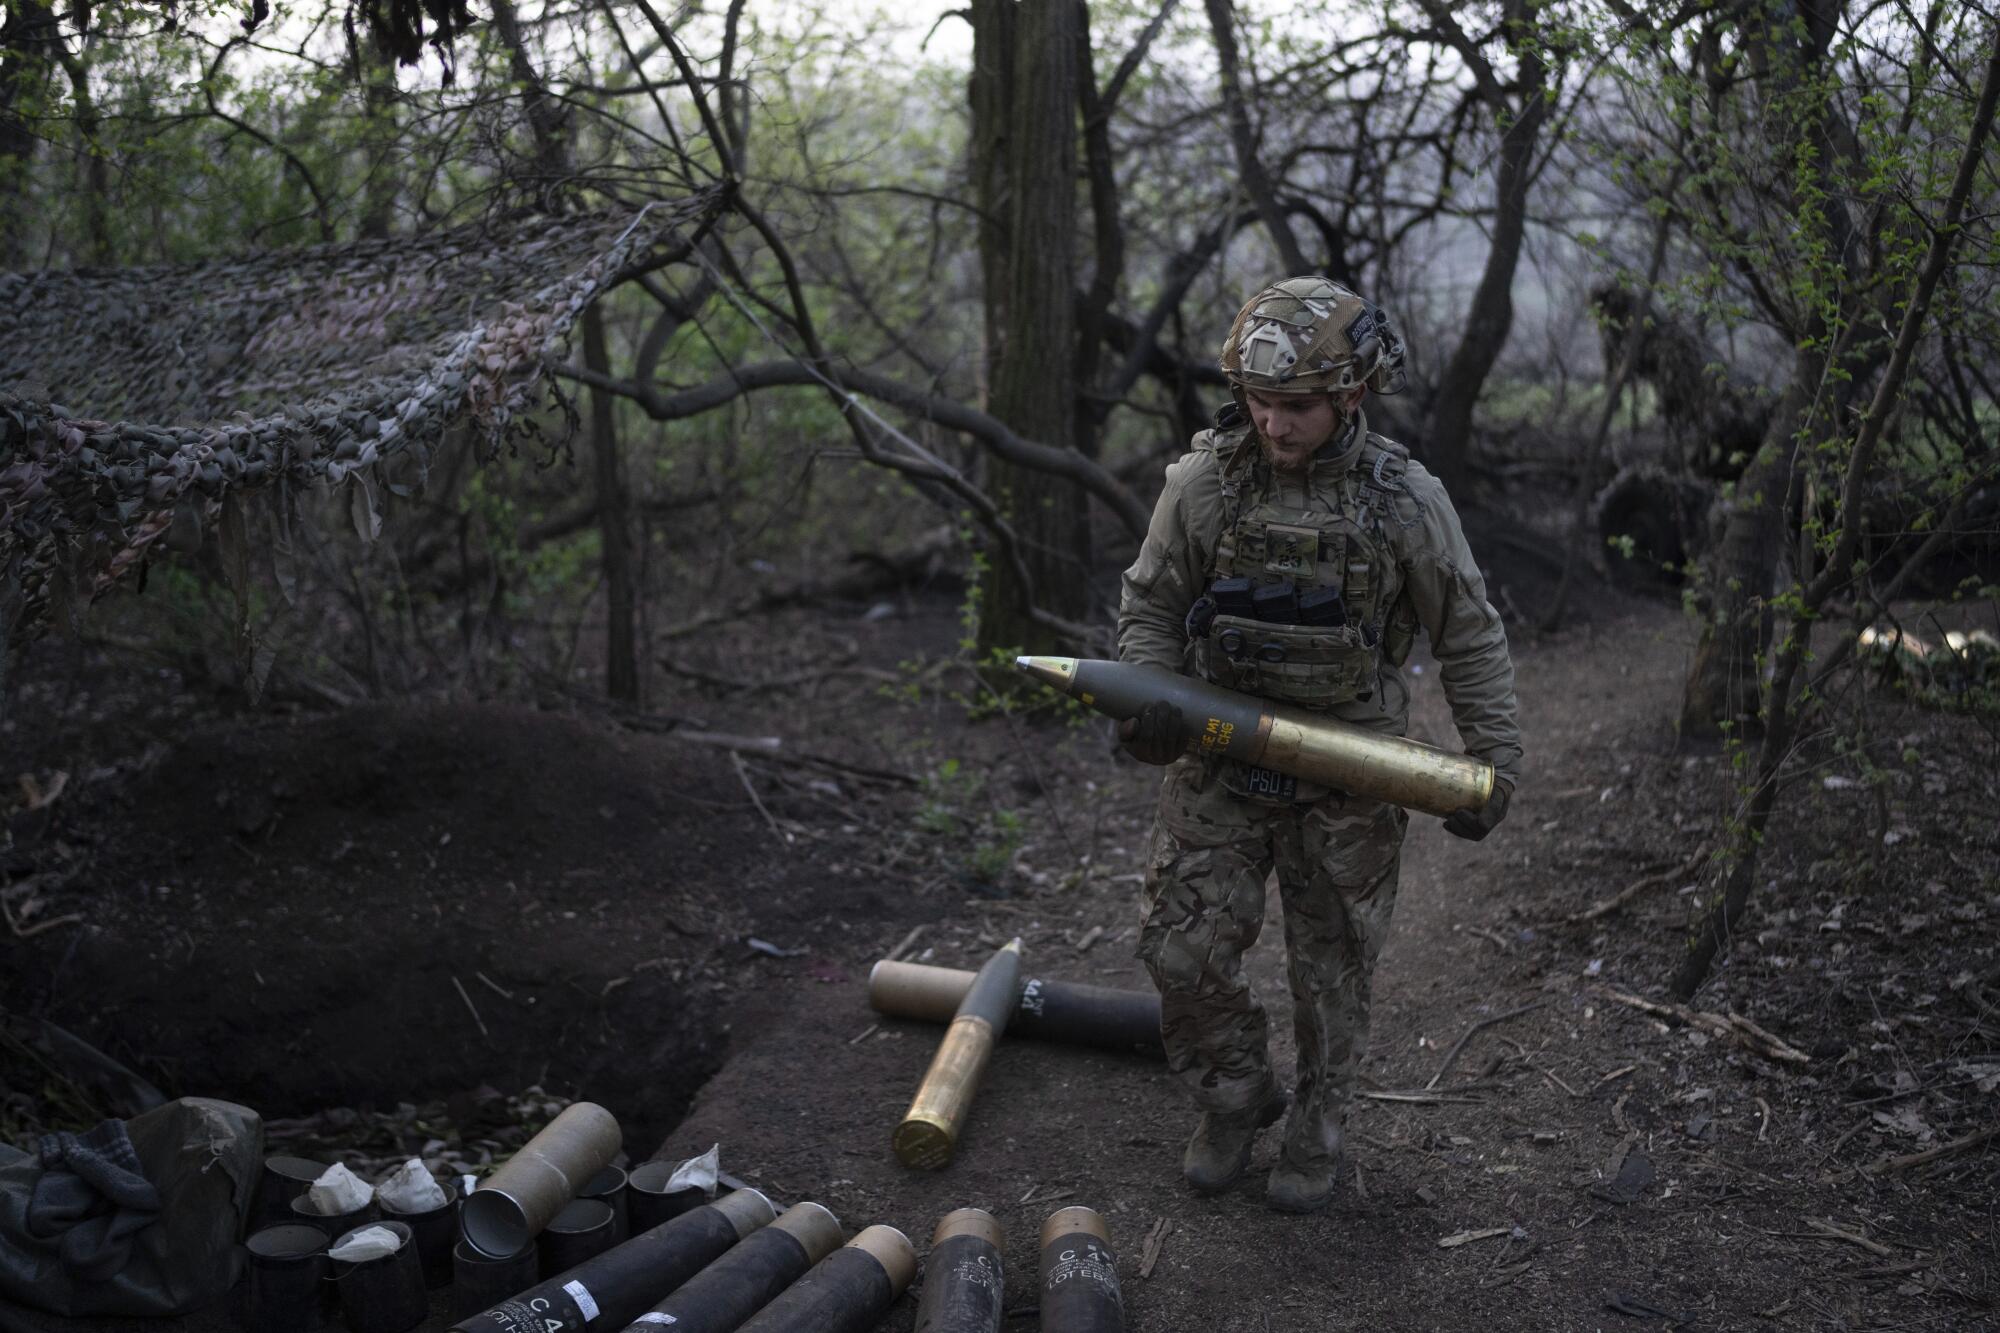 A person in camouflage, body armor and a helmet carries a large howitzer shell in a wooded area.